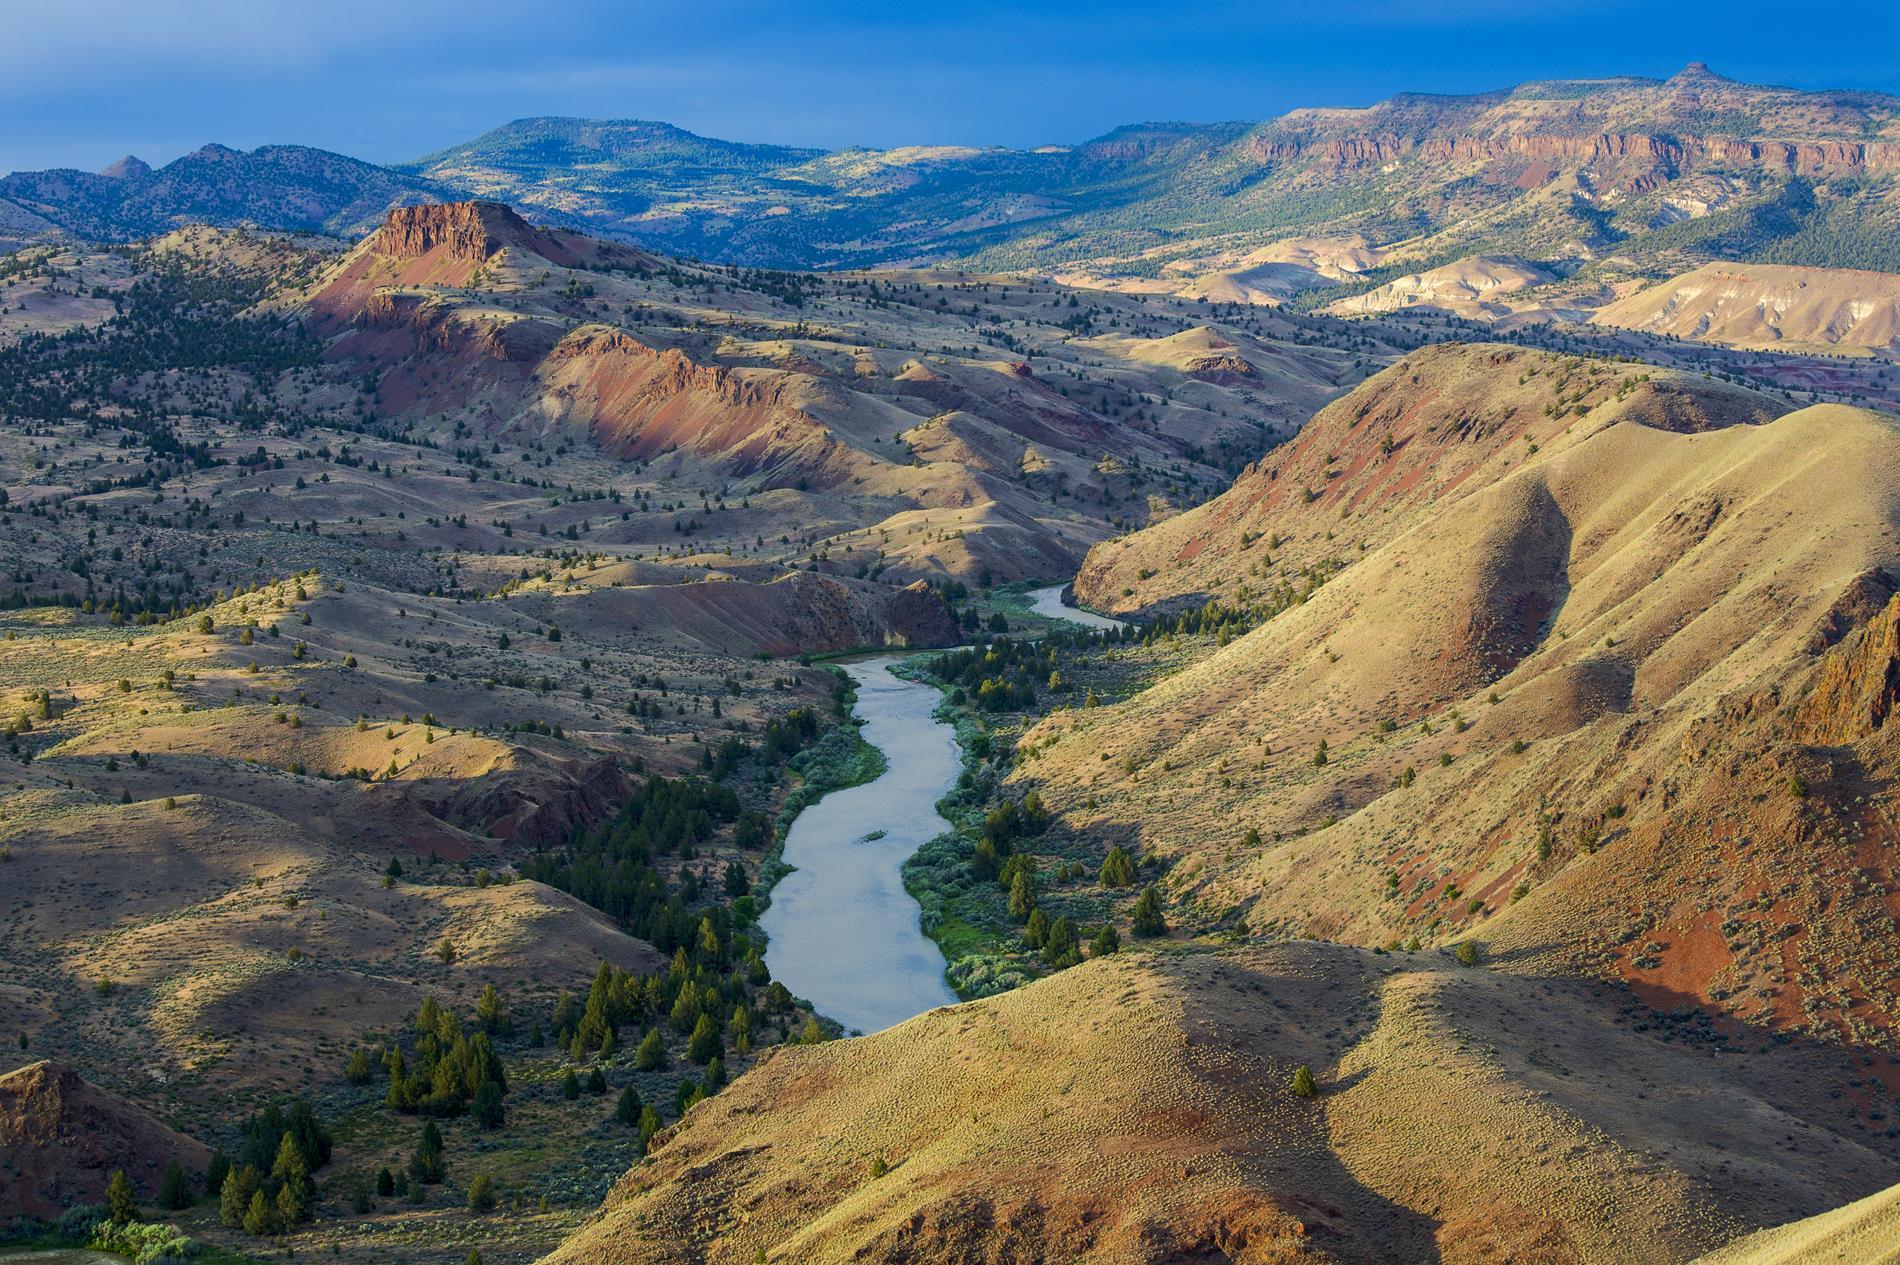 Overhead view of John Day Valley showing John Day River and landscape